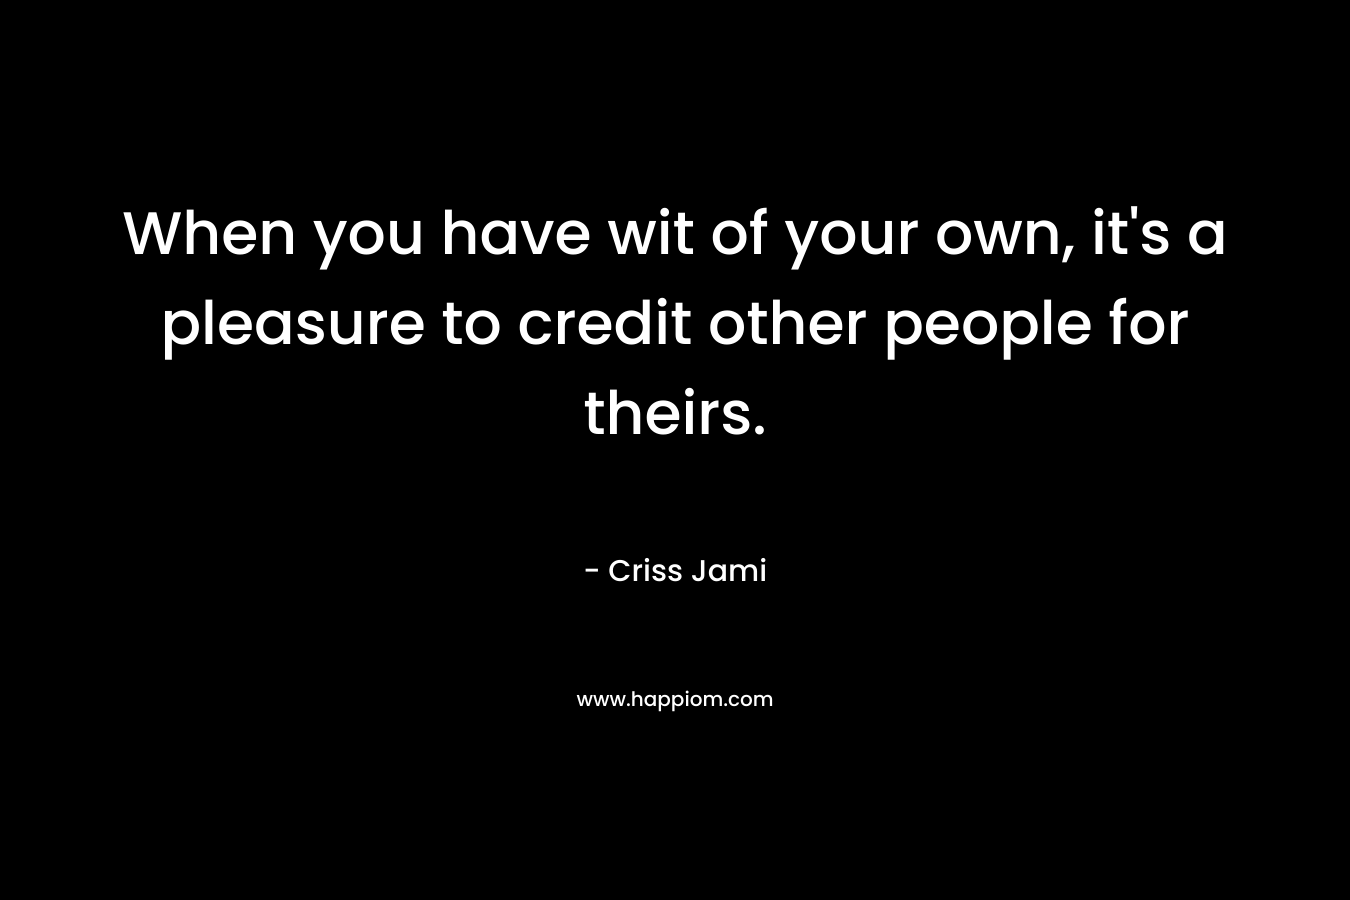 When you have wit of your own, it's a pleasure to credit other people for theirs.